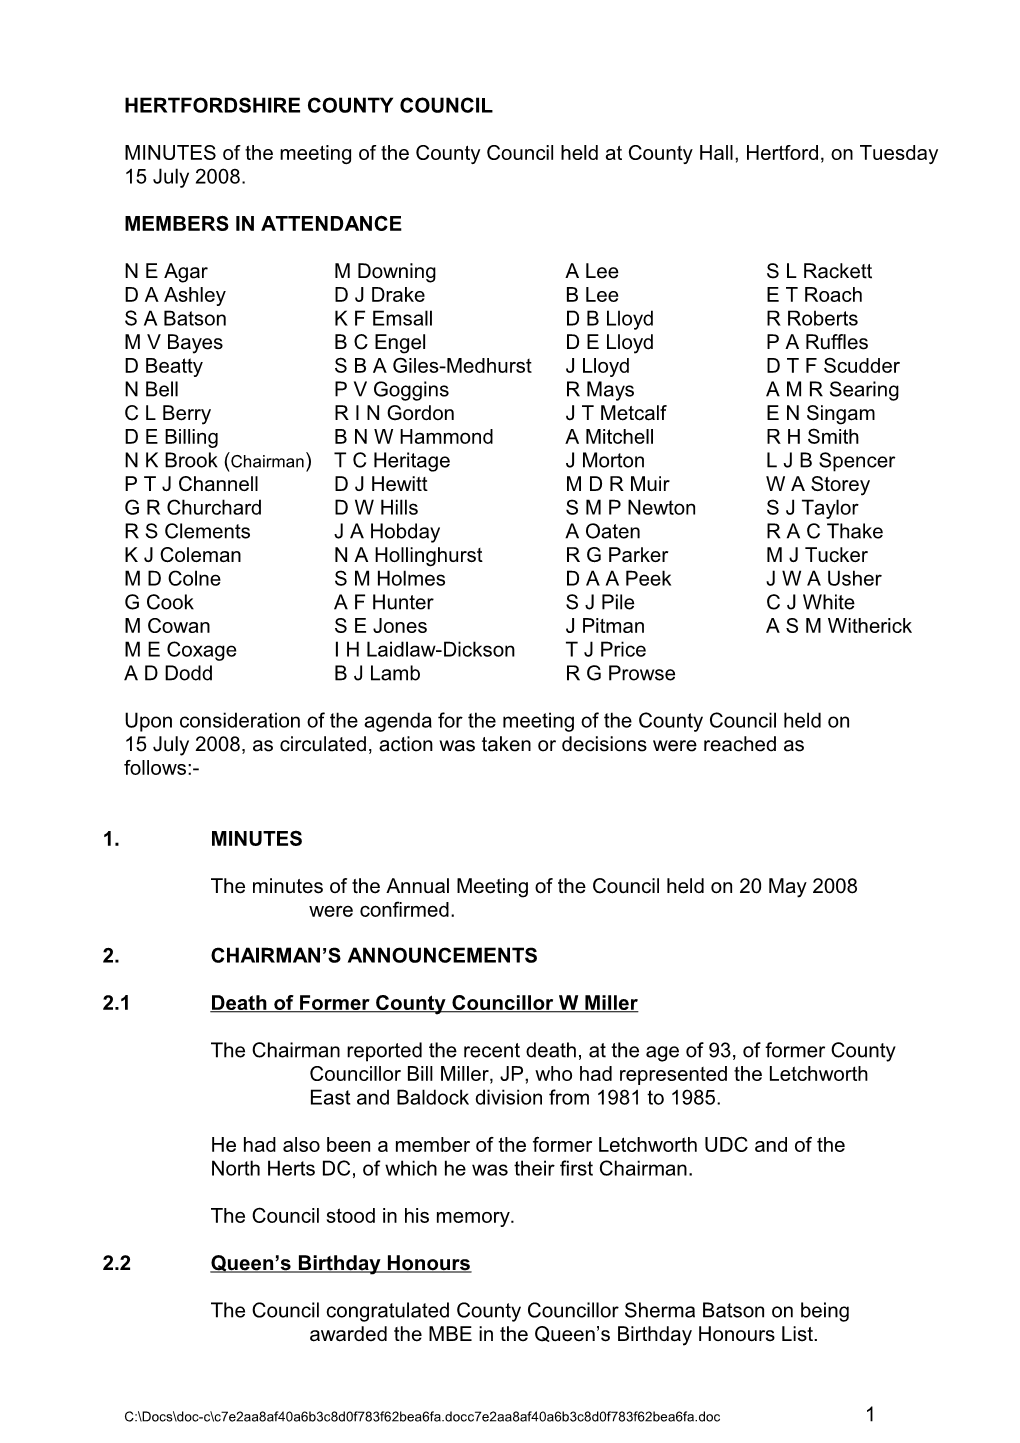 HERTFORDSHIRE COUNTY COUNCIL Minutes 15 July 2008